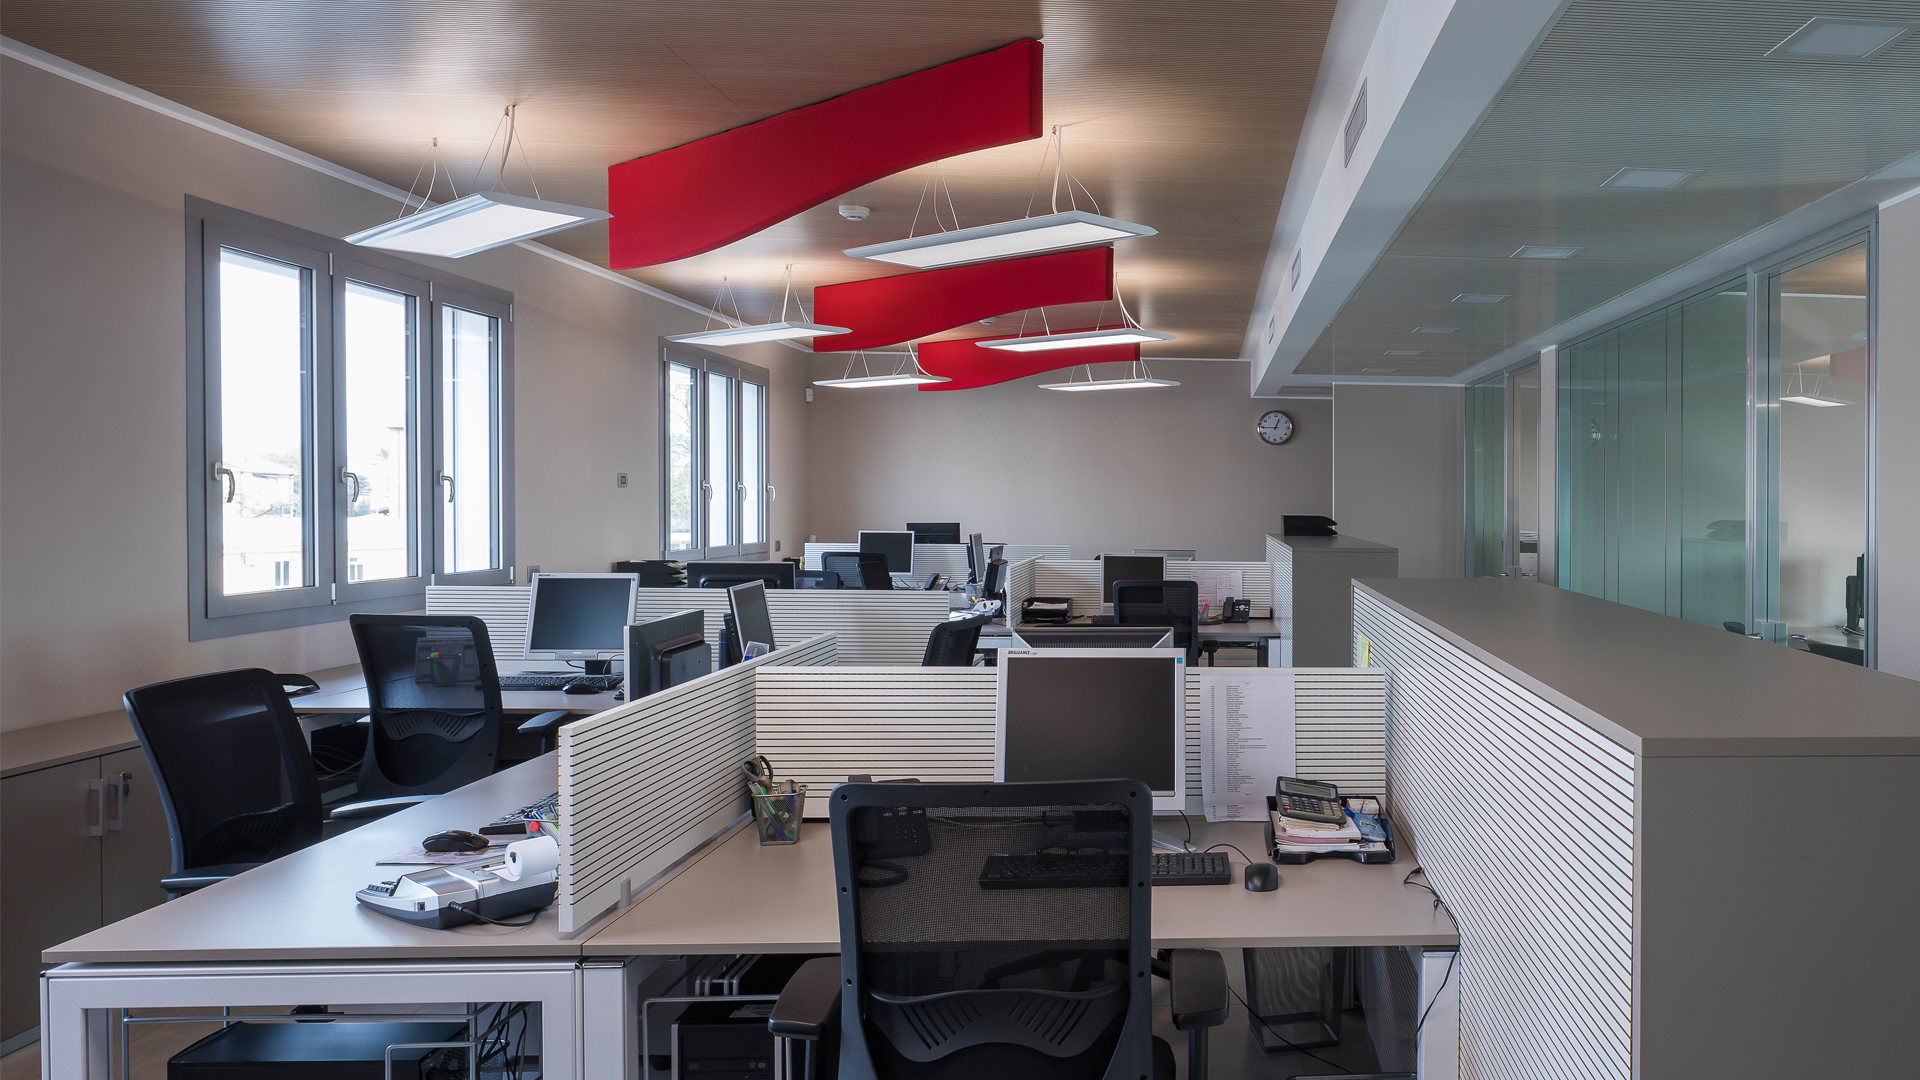 Scurati Spa, the relevance of acoustics inside the office - Level ...